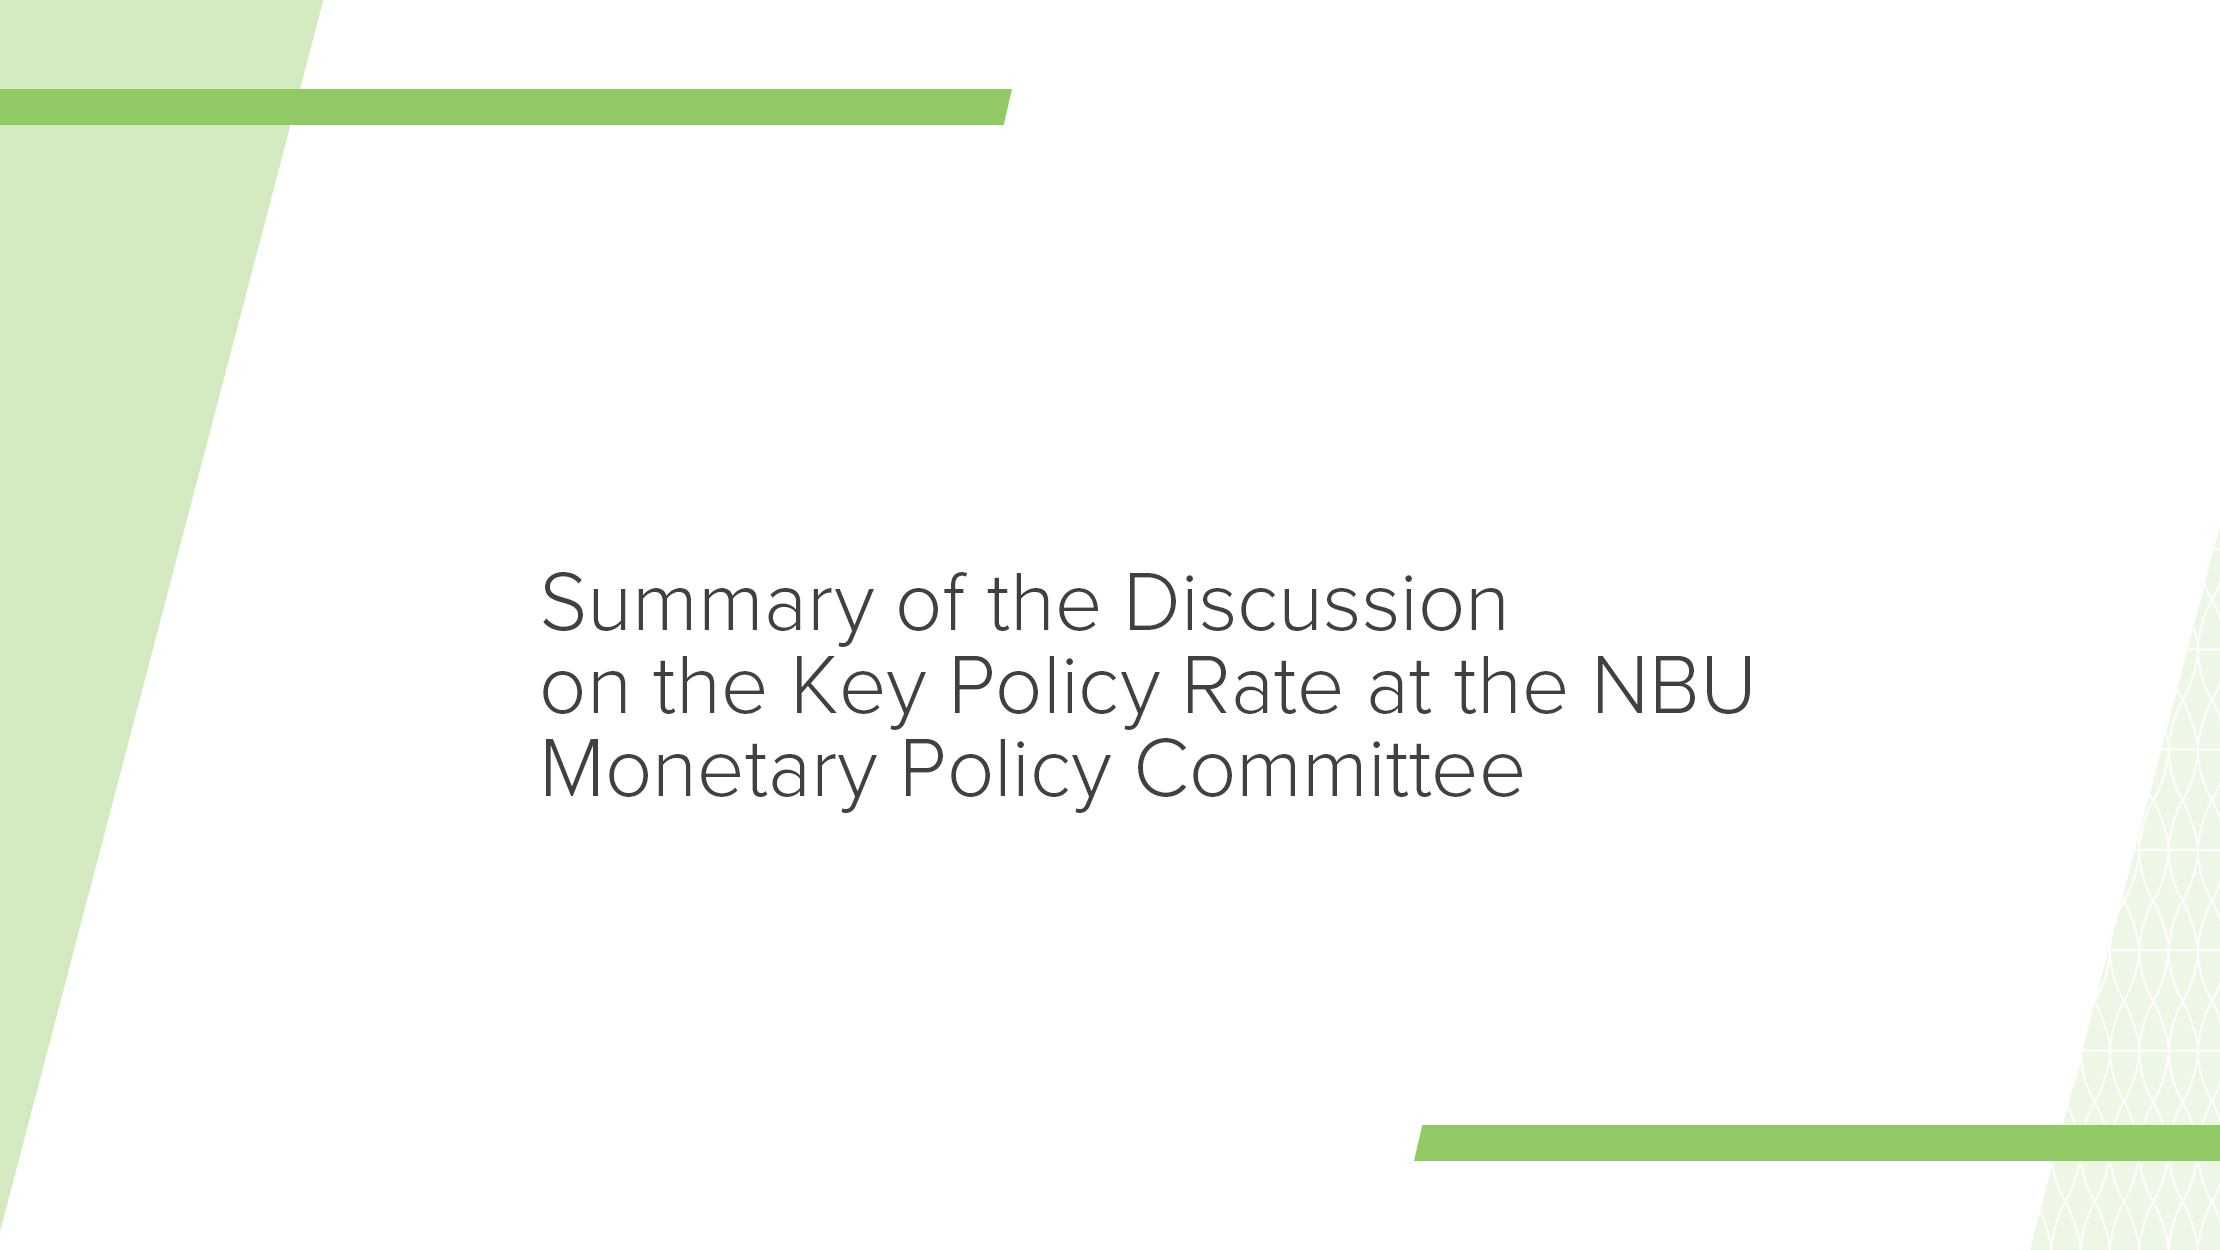 Summary of Key Policy Rate Discussion by NBU Monetary Policy Committee on 13 March 2024